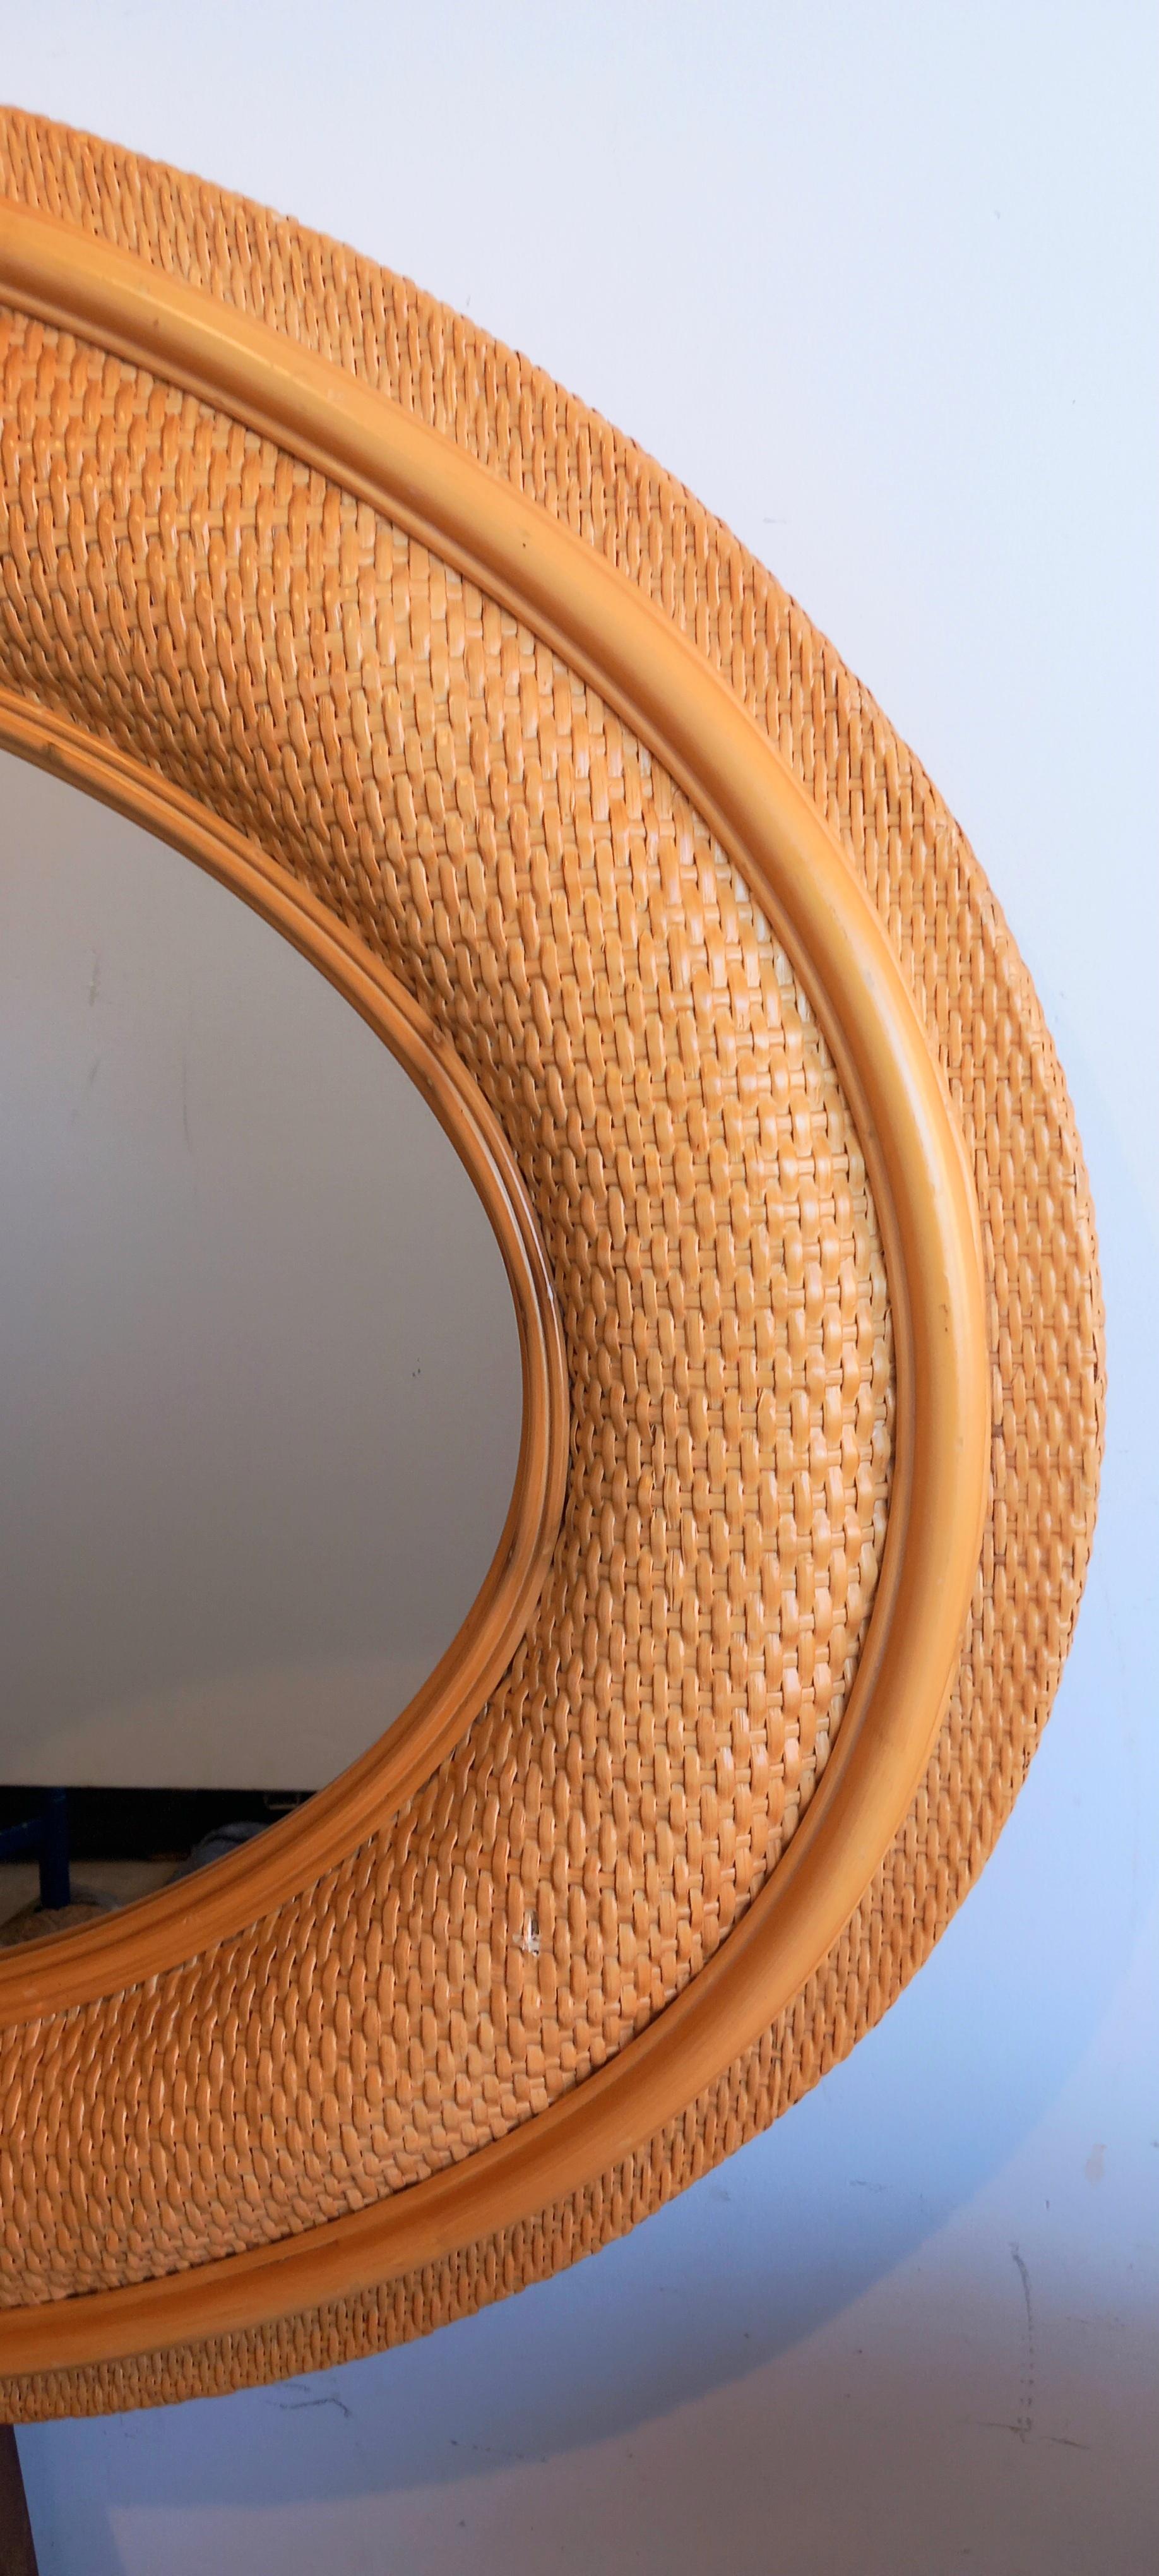 20th Century Mirrors Rattan Rare Extra Large Oval  Mid-20th  Century  Vertical or Horizontal  For Sale